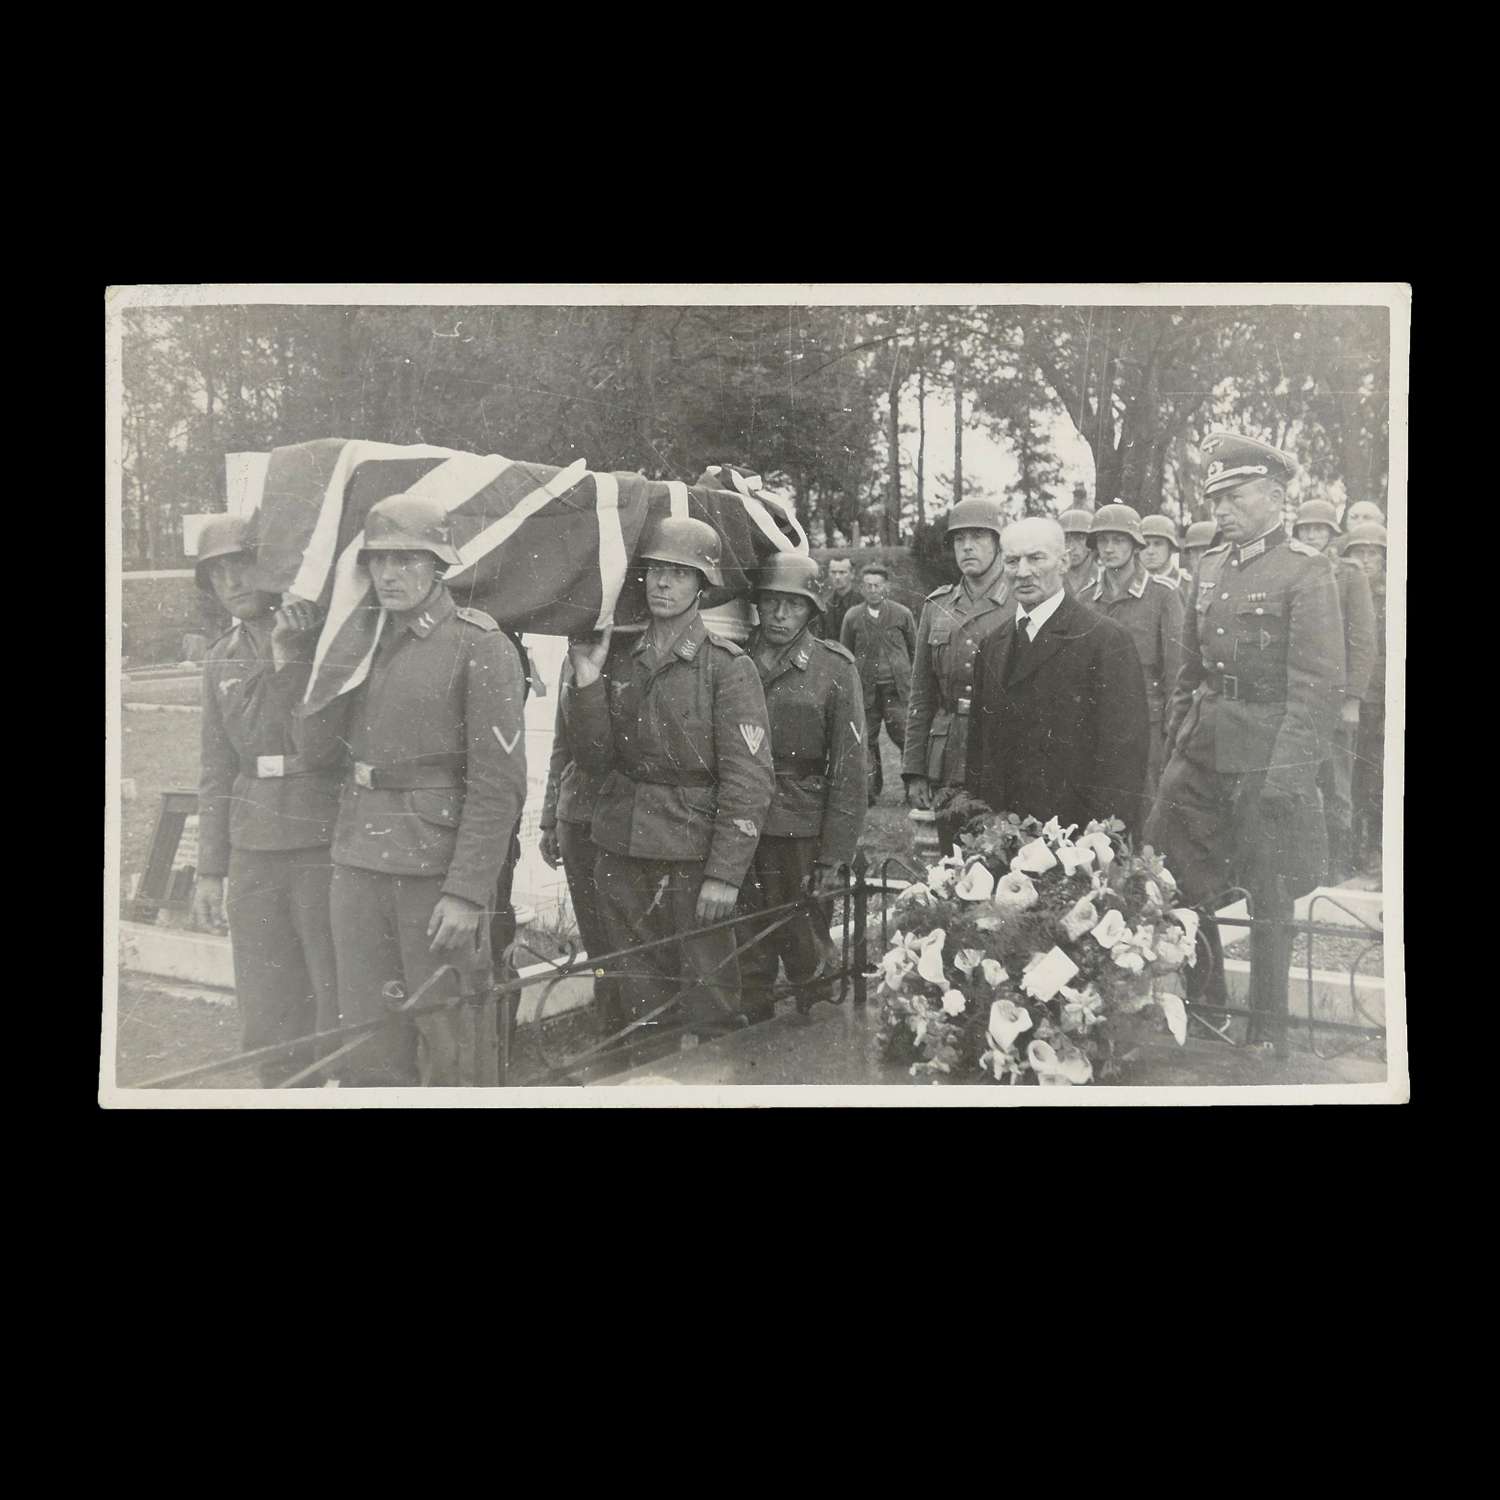 Postcard showing RAF airman's funeral in Jersey